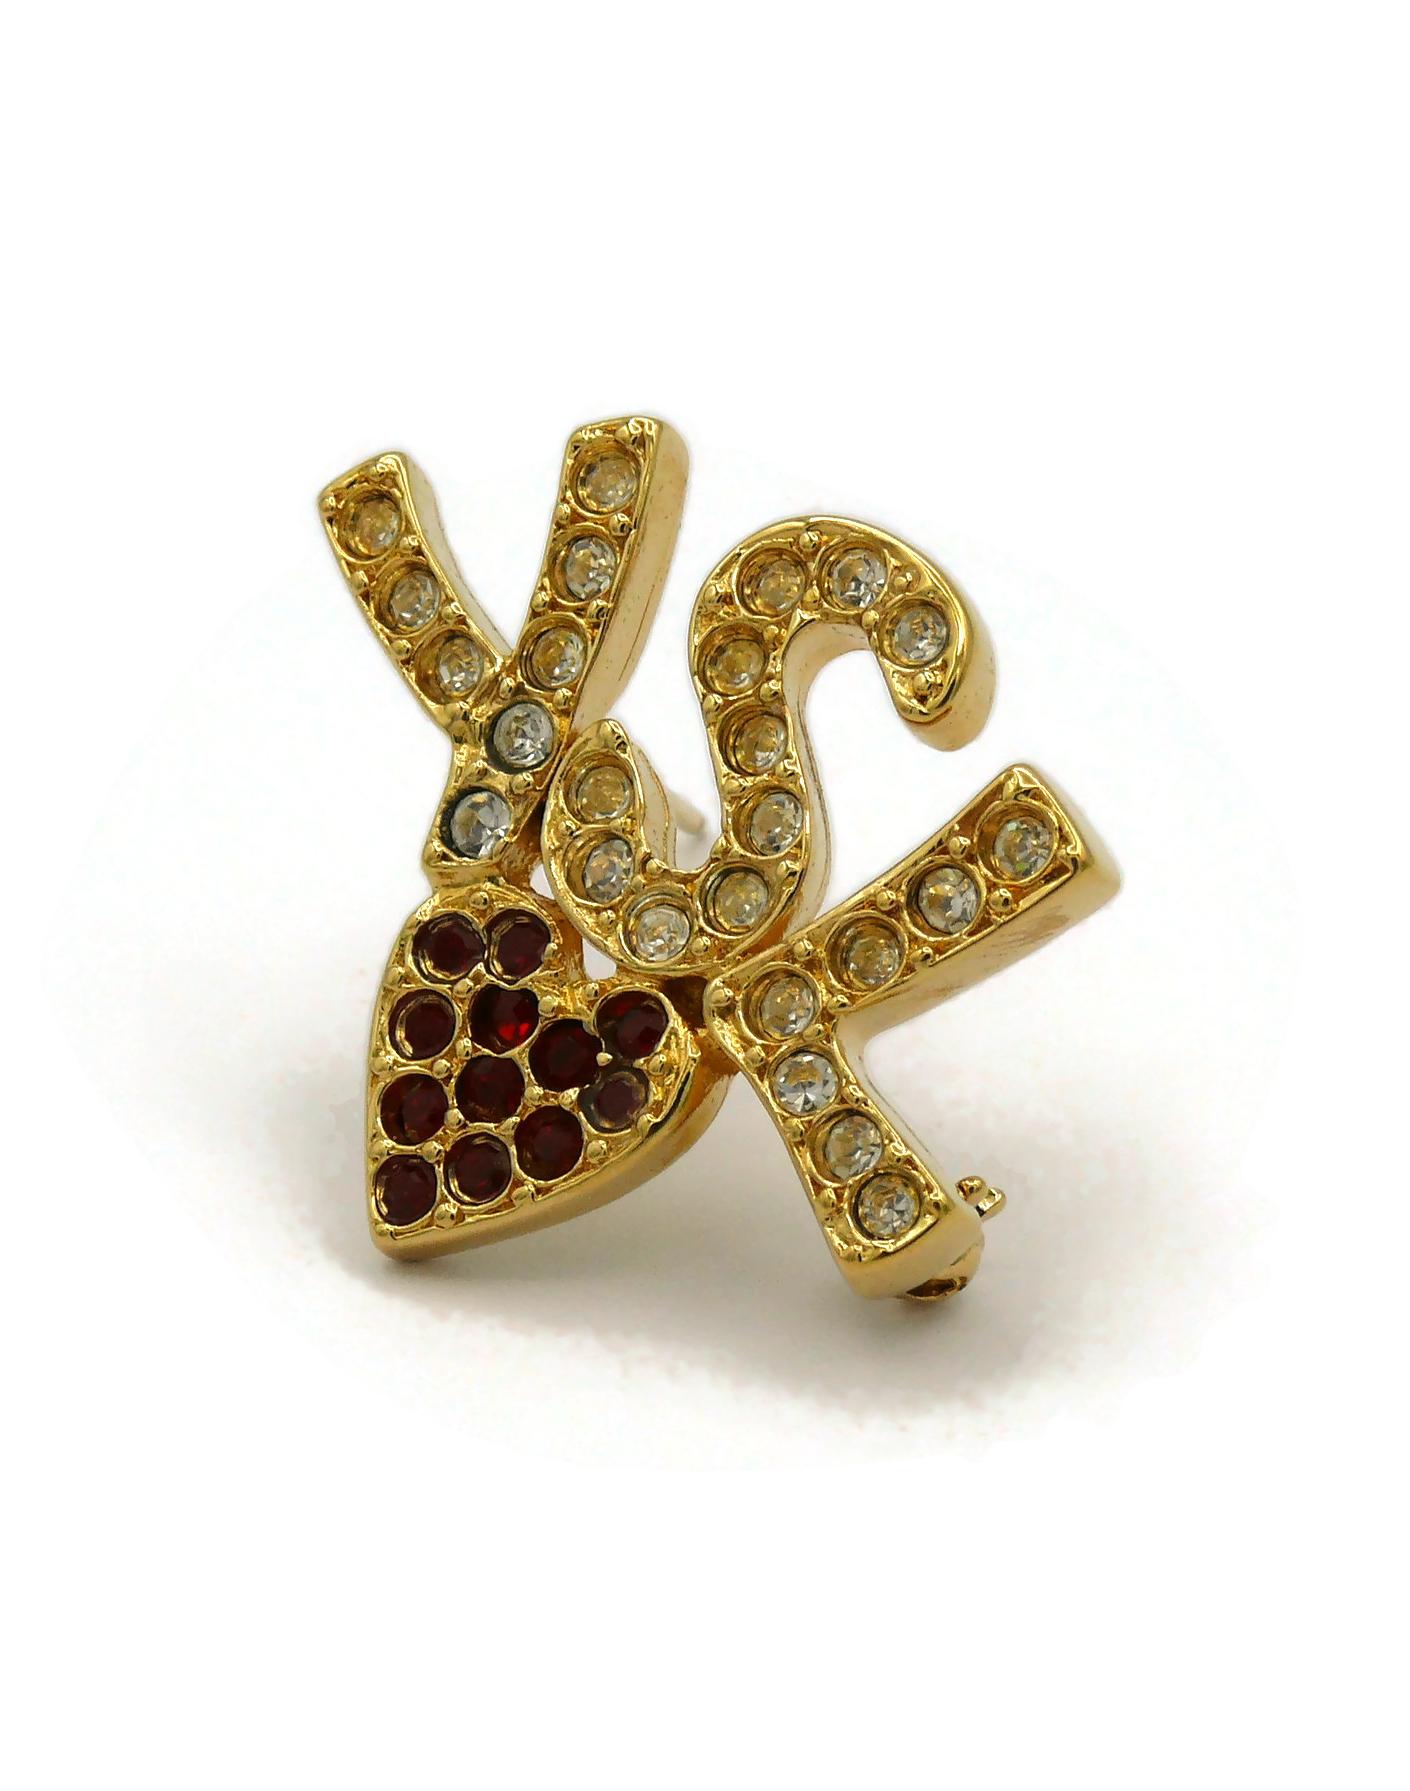 YVES SAINT LAURENT YSL Vintage Jewelled Initials Heart Brooch For Sale 1